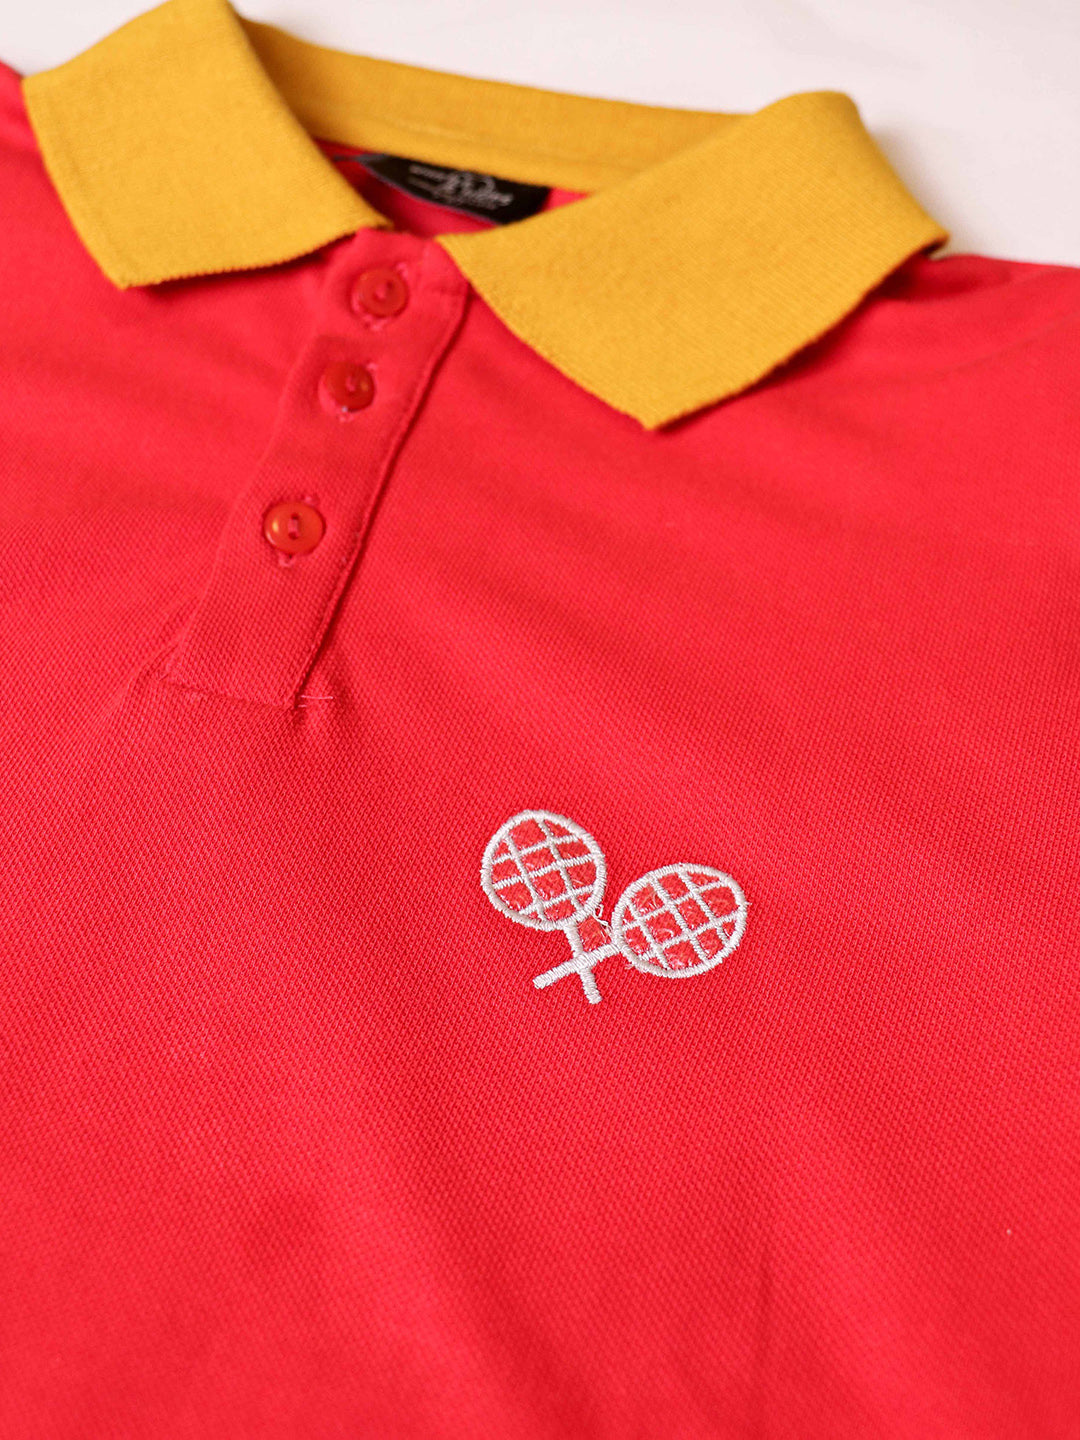 Embroidered Polo T-shirts Combo- Red and White